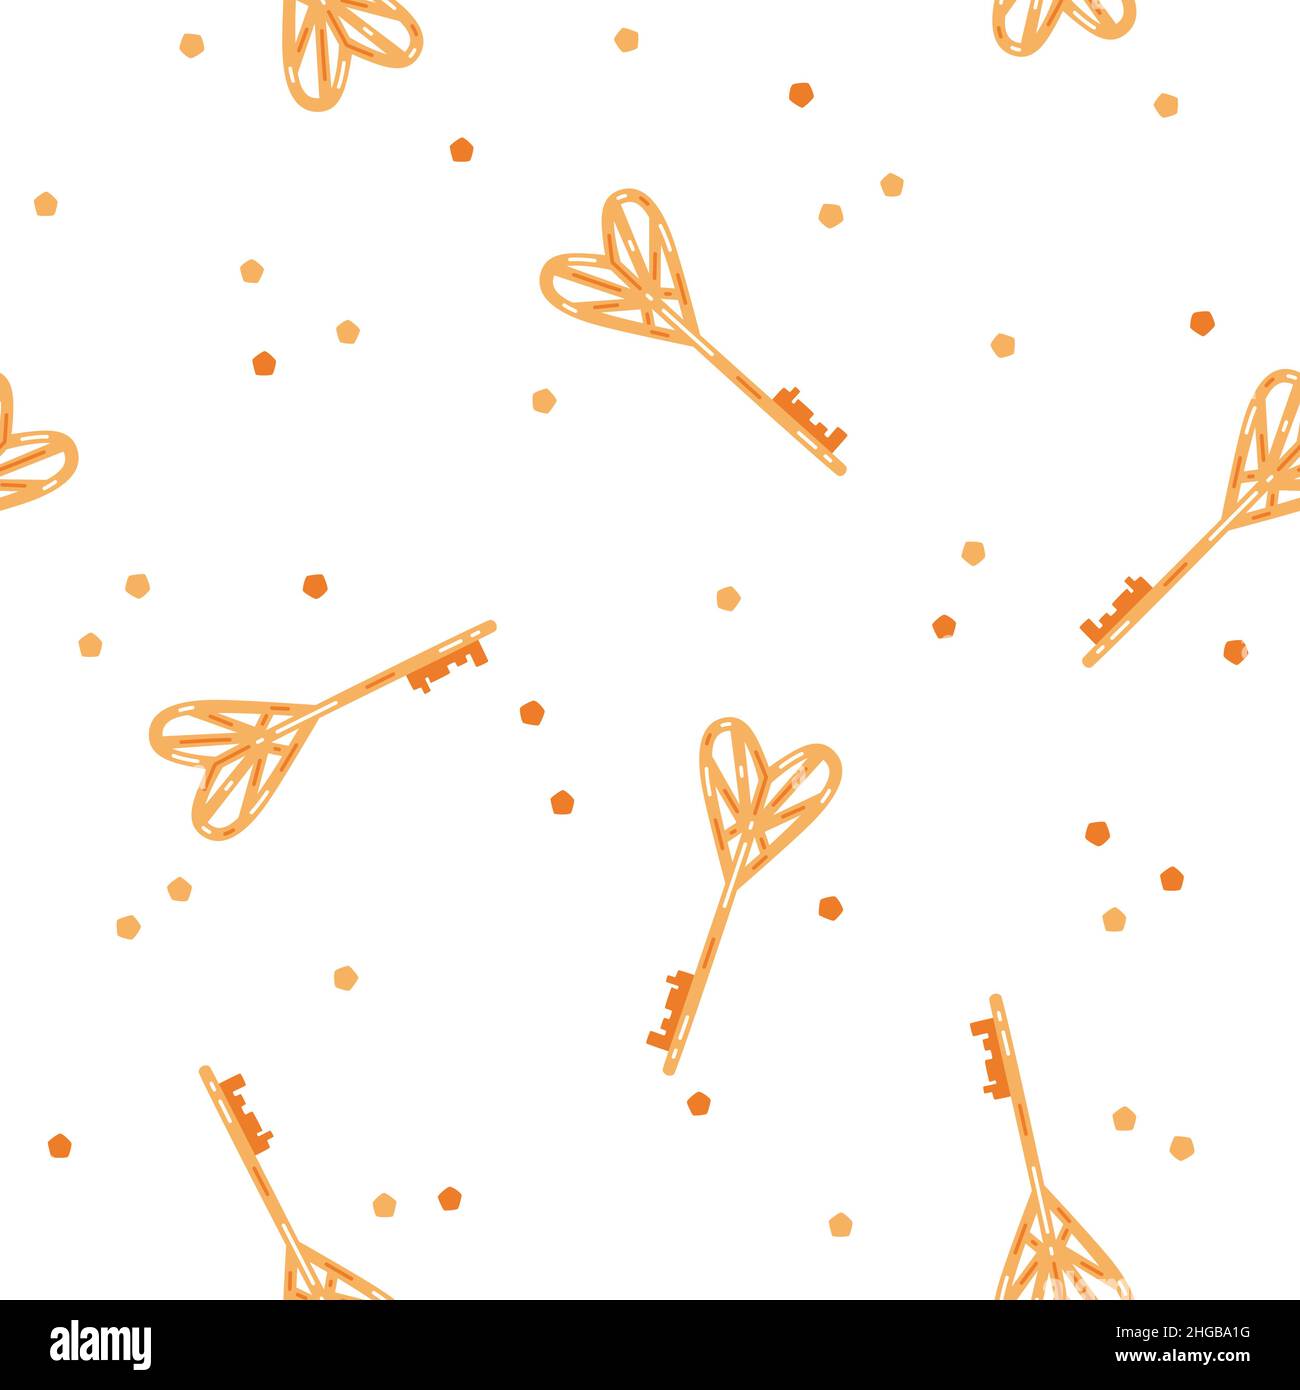 St. Valentine's Day seamless pattern with golden heart-shaped keys Stock Vector